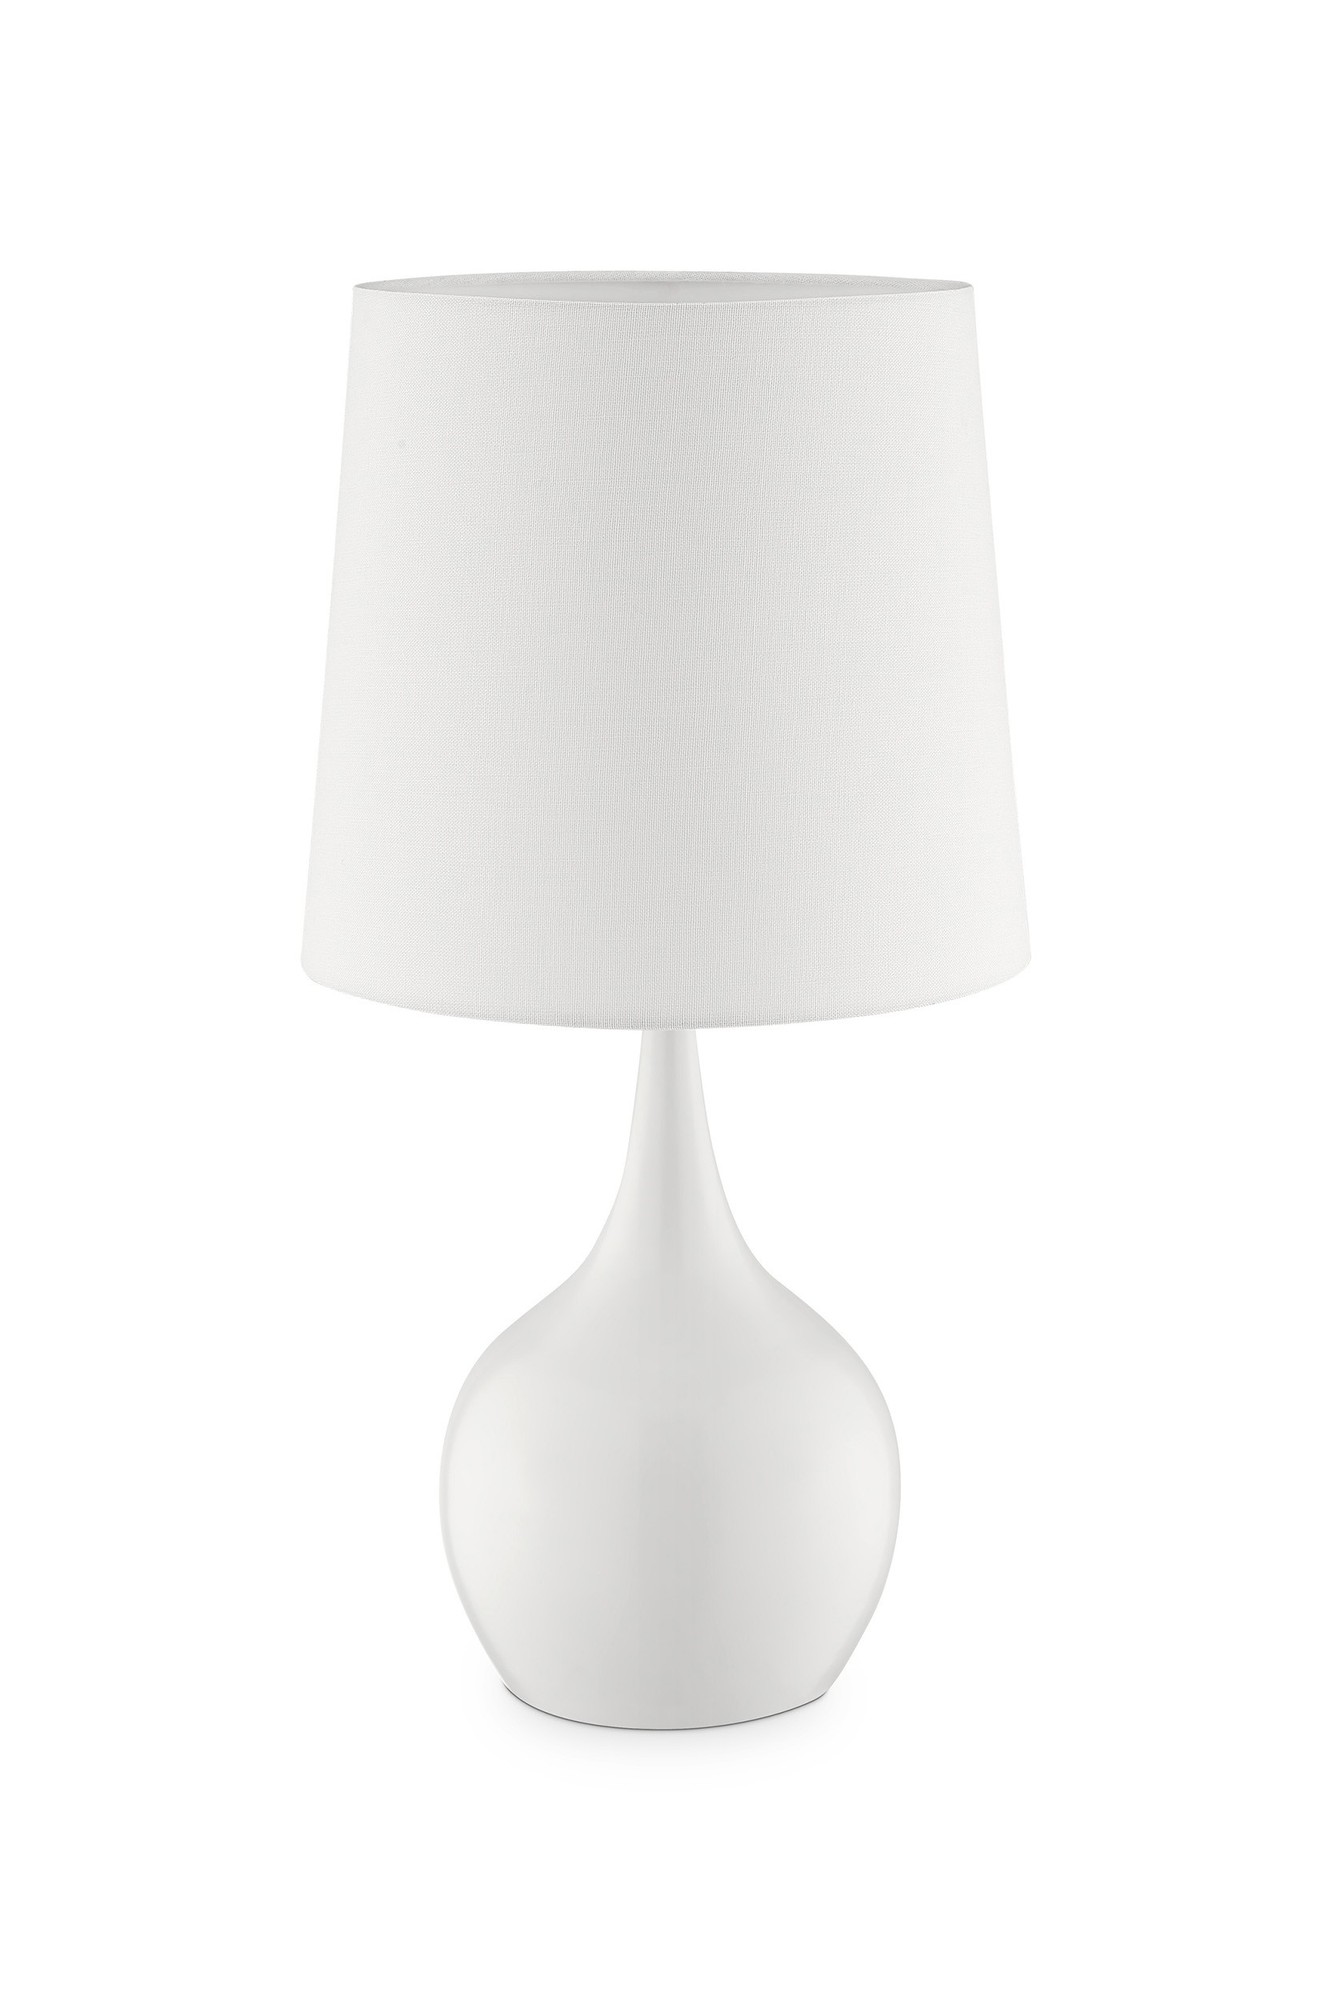 Minimalist White Table Lamp with Touch Switch